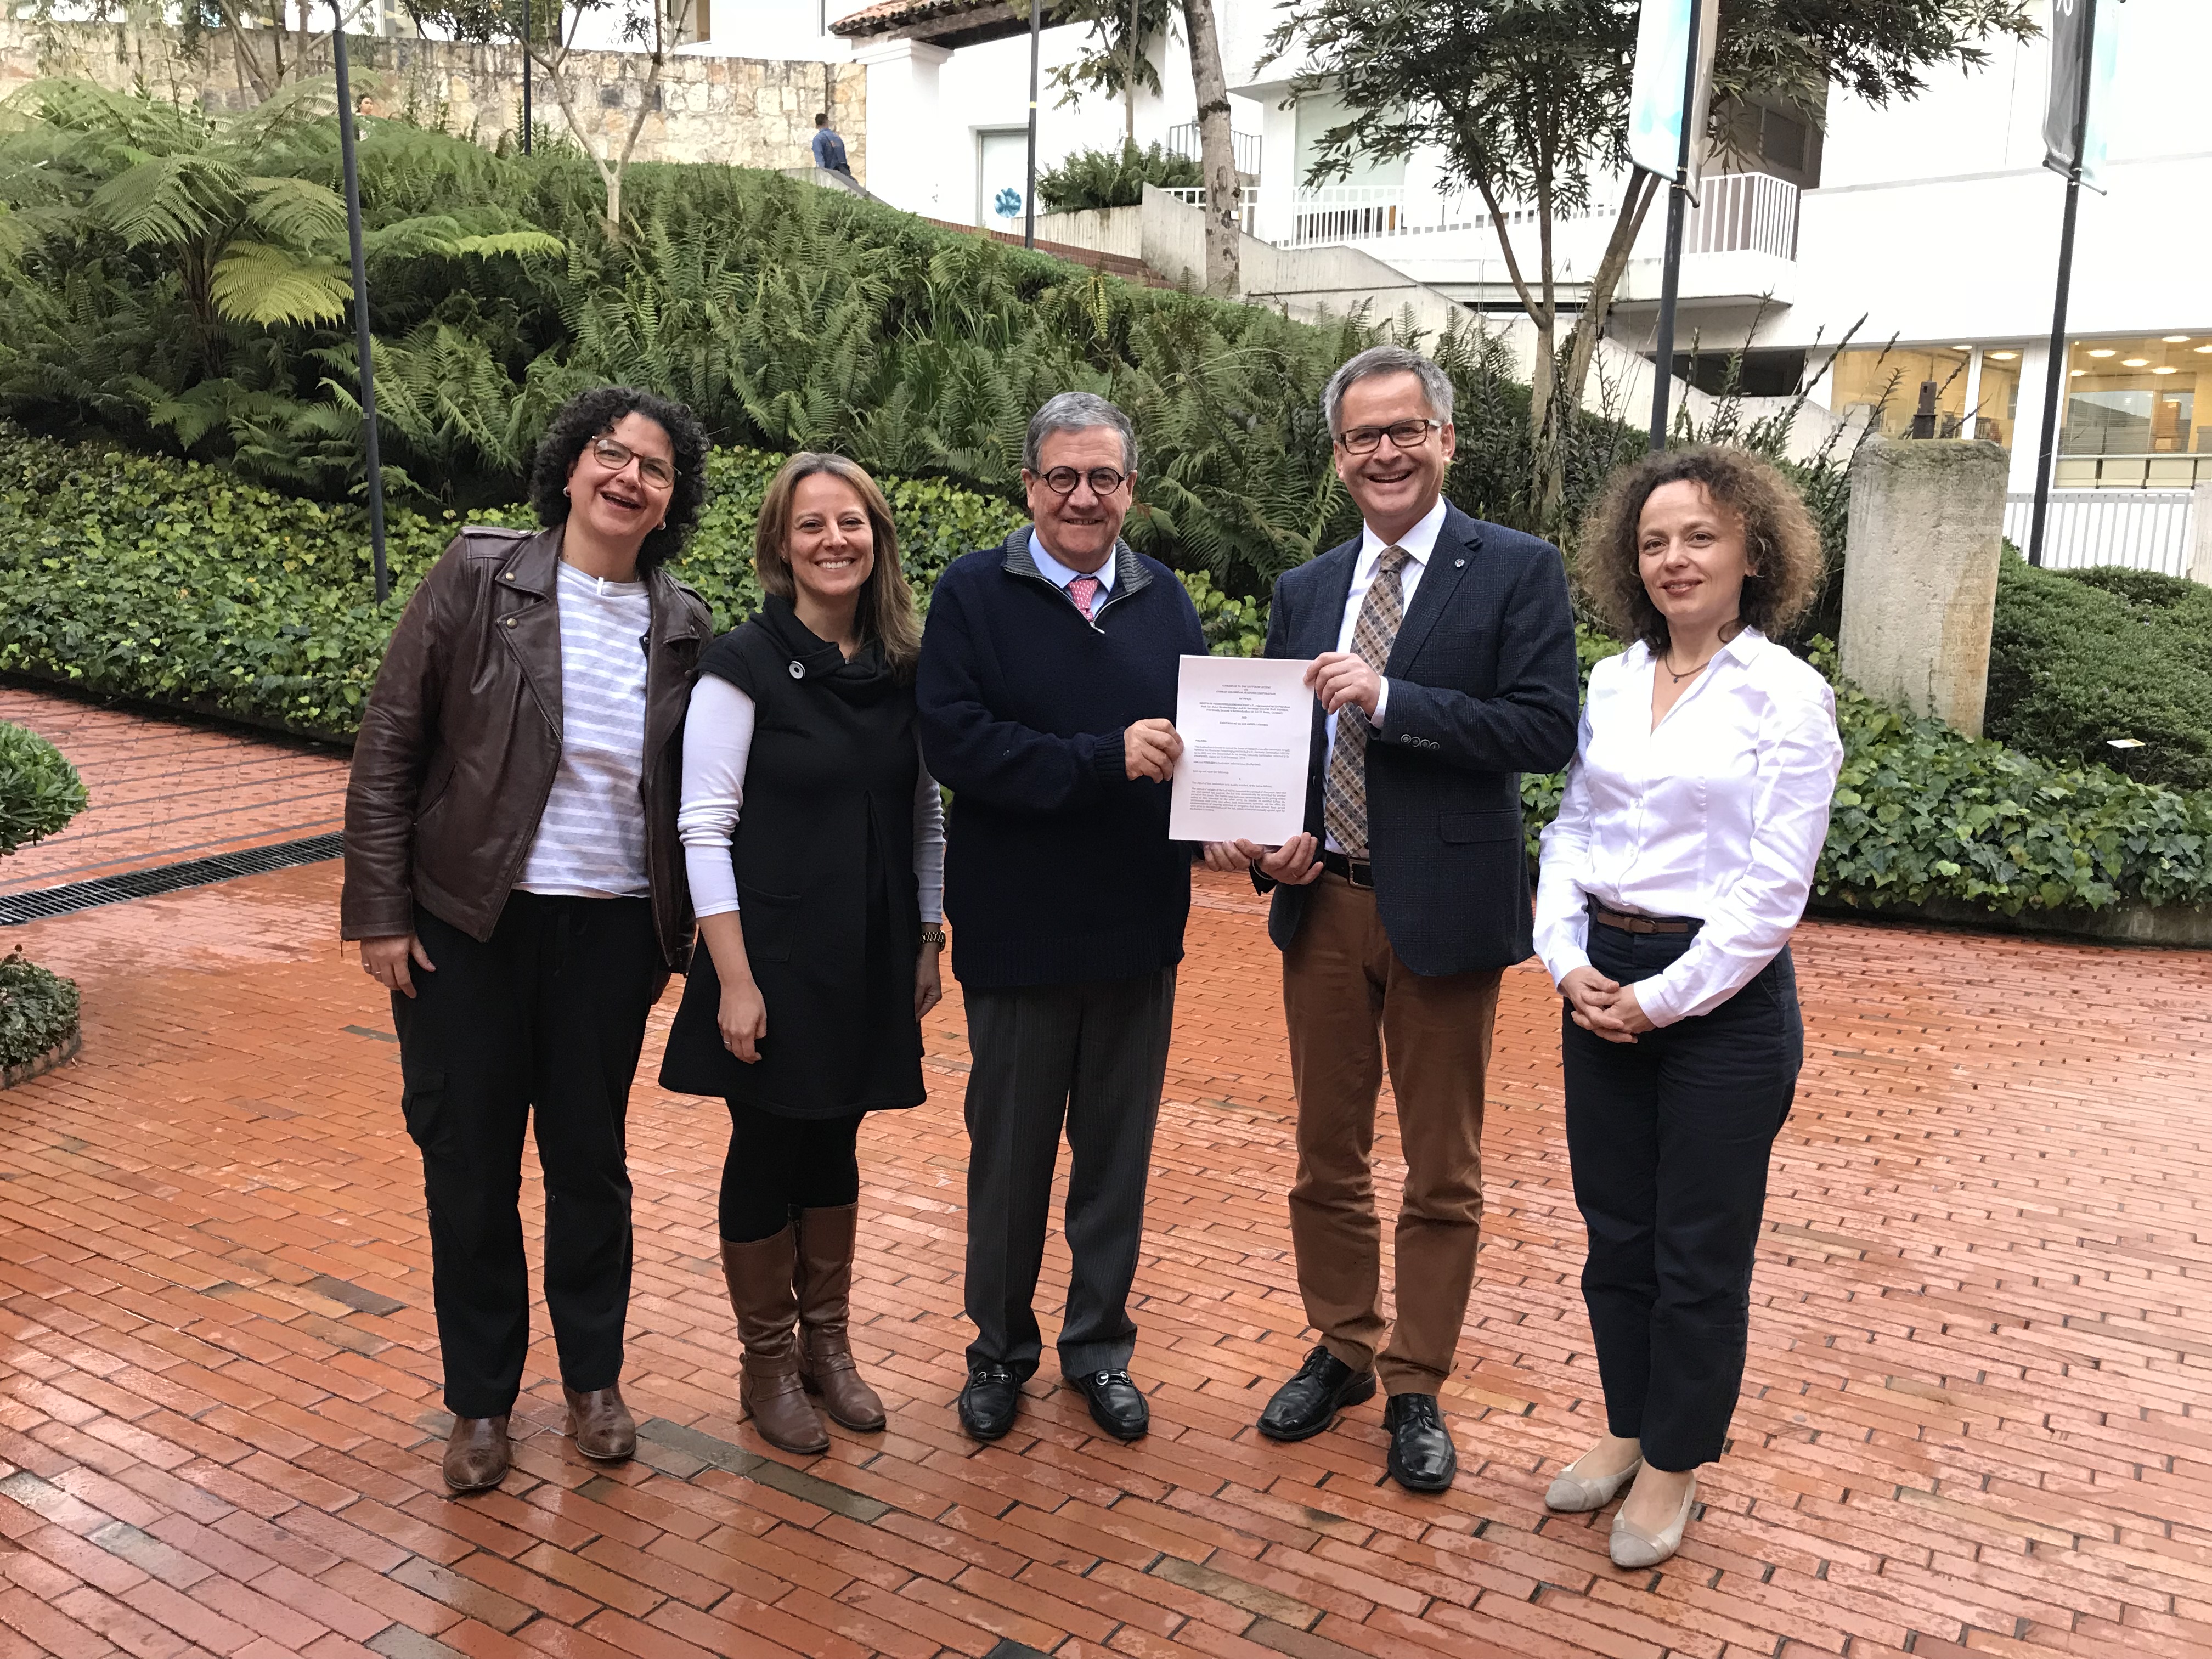 Representatives of UNIANDES and the DFG after the signing of the agreement